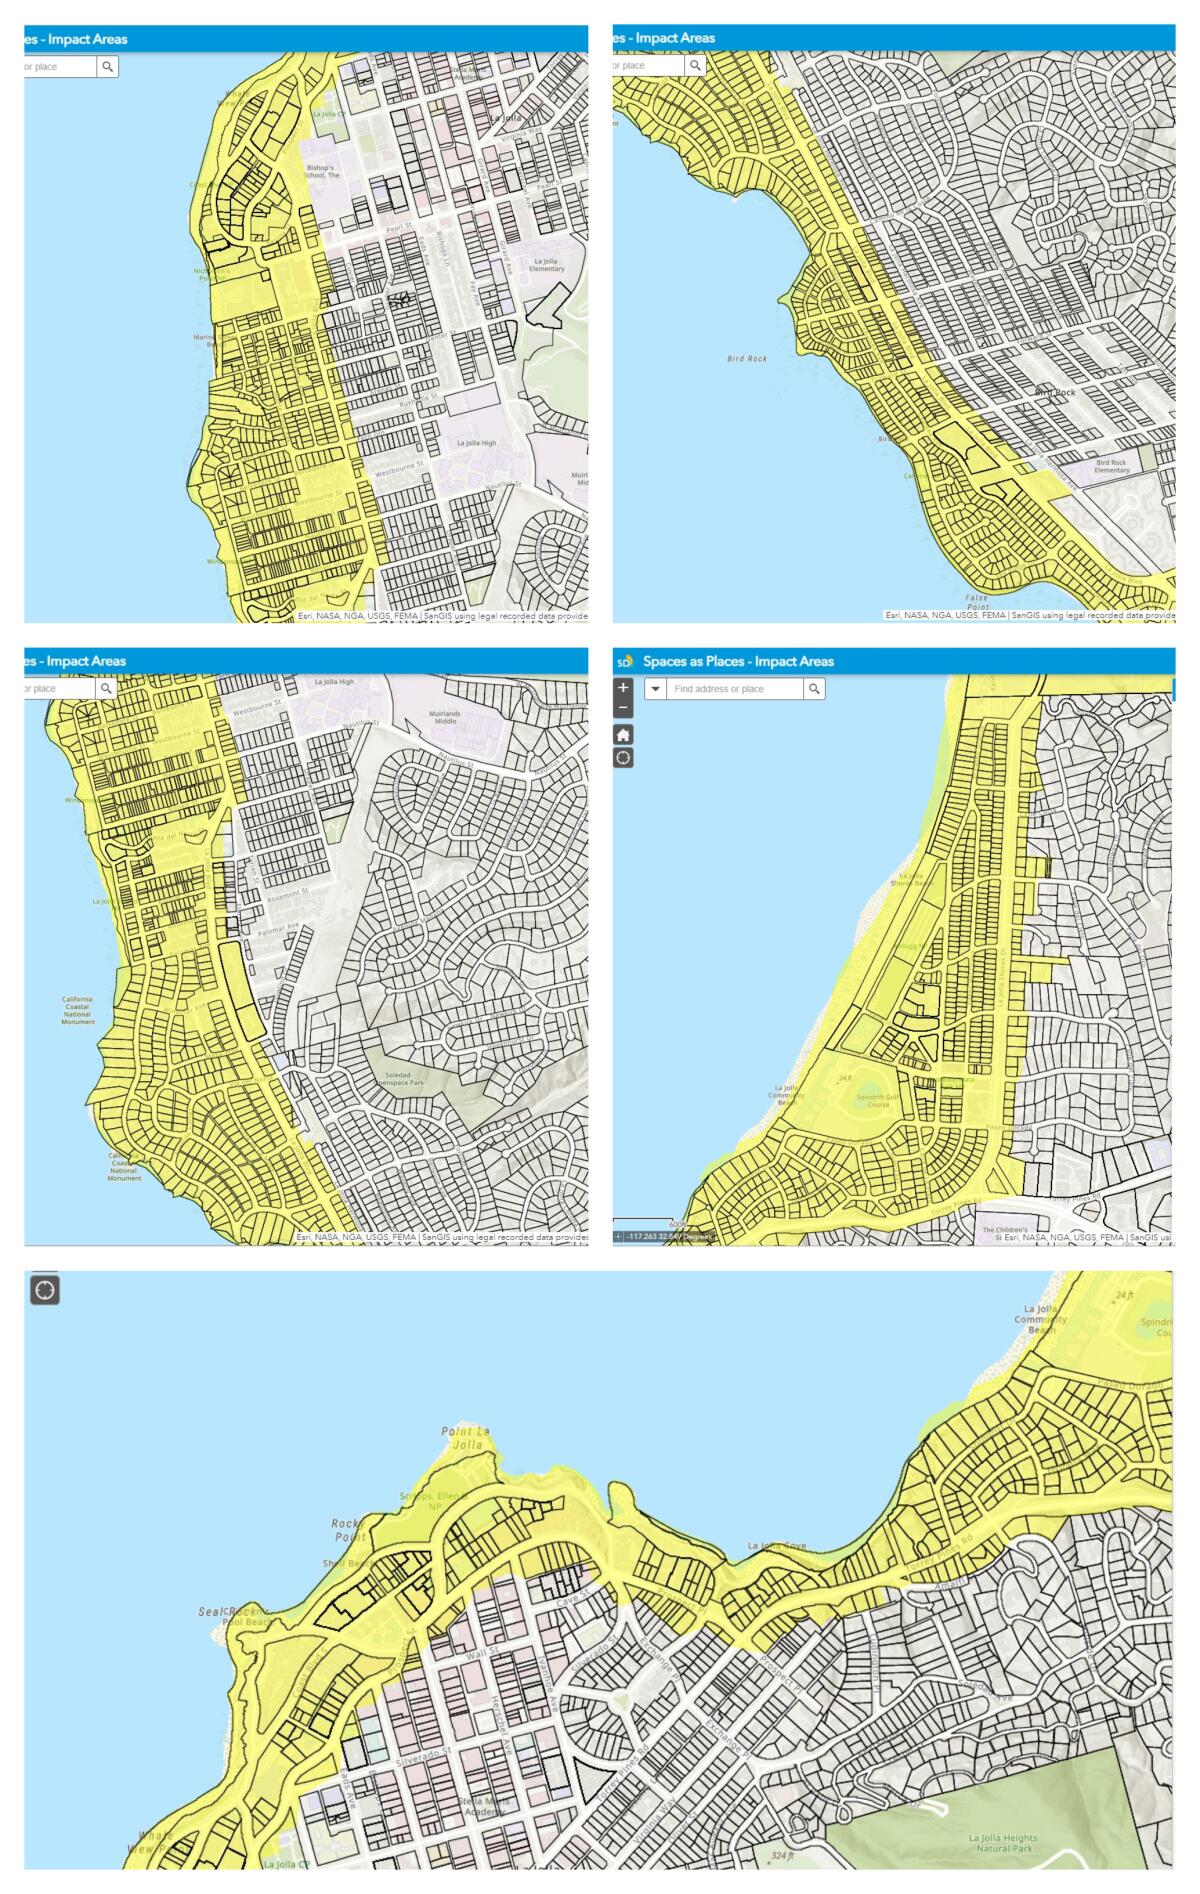 These are the boundaries of the "beach impact areas" in La Jolla.